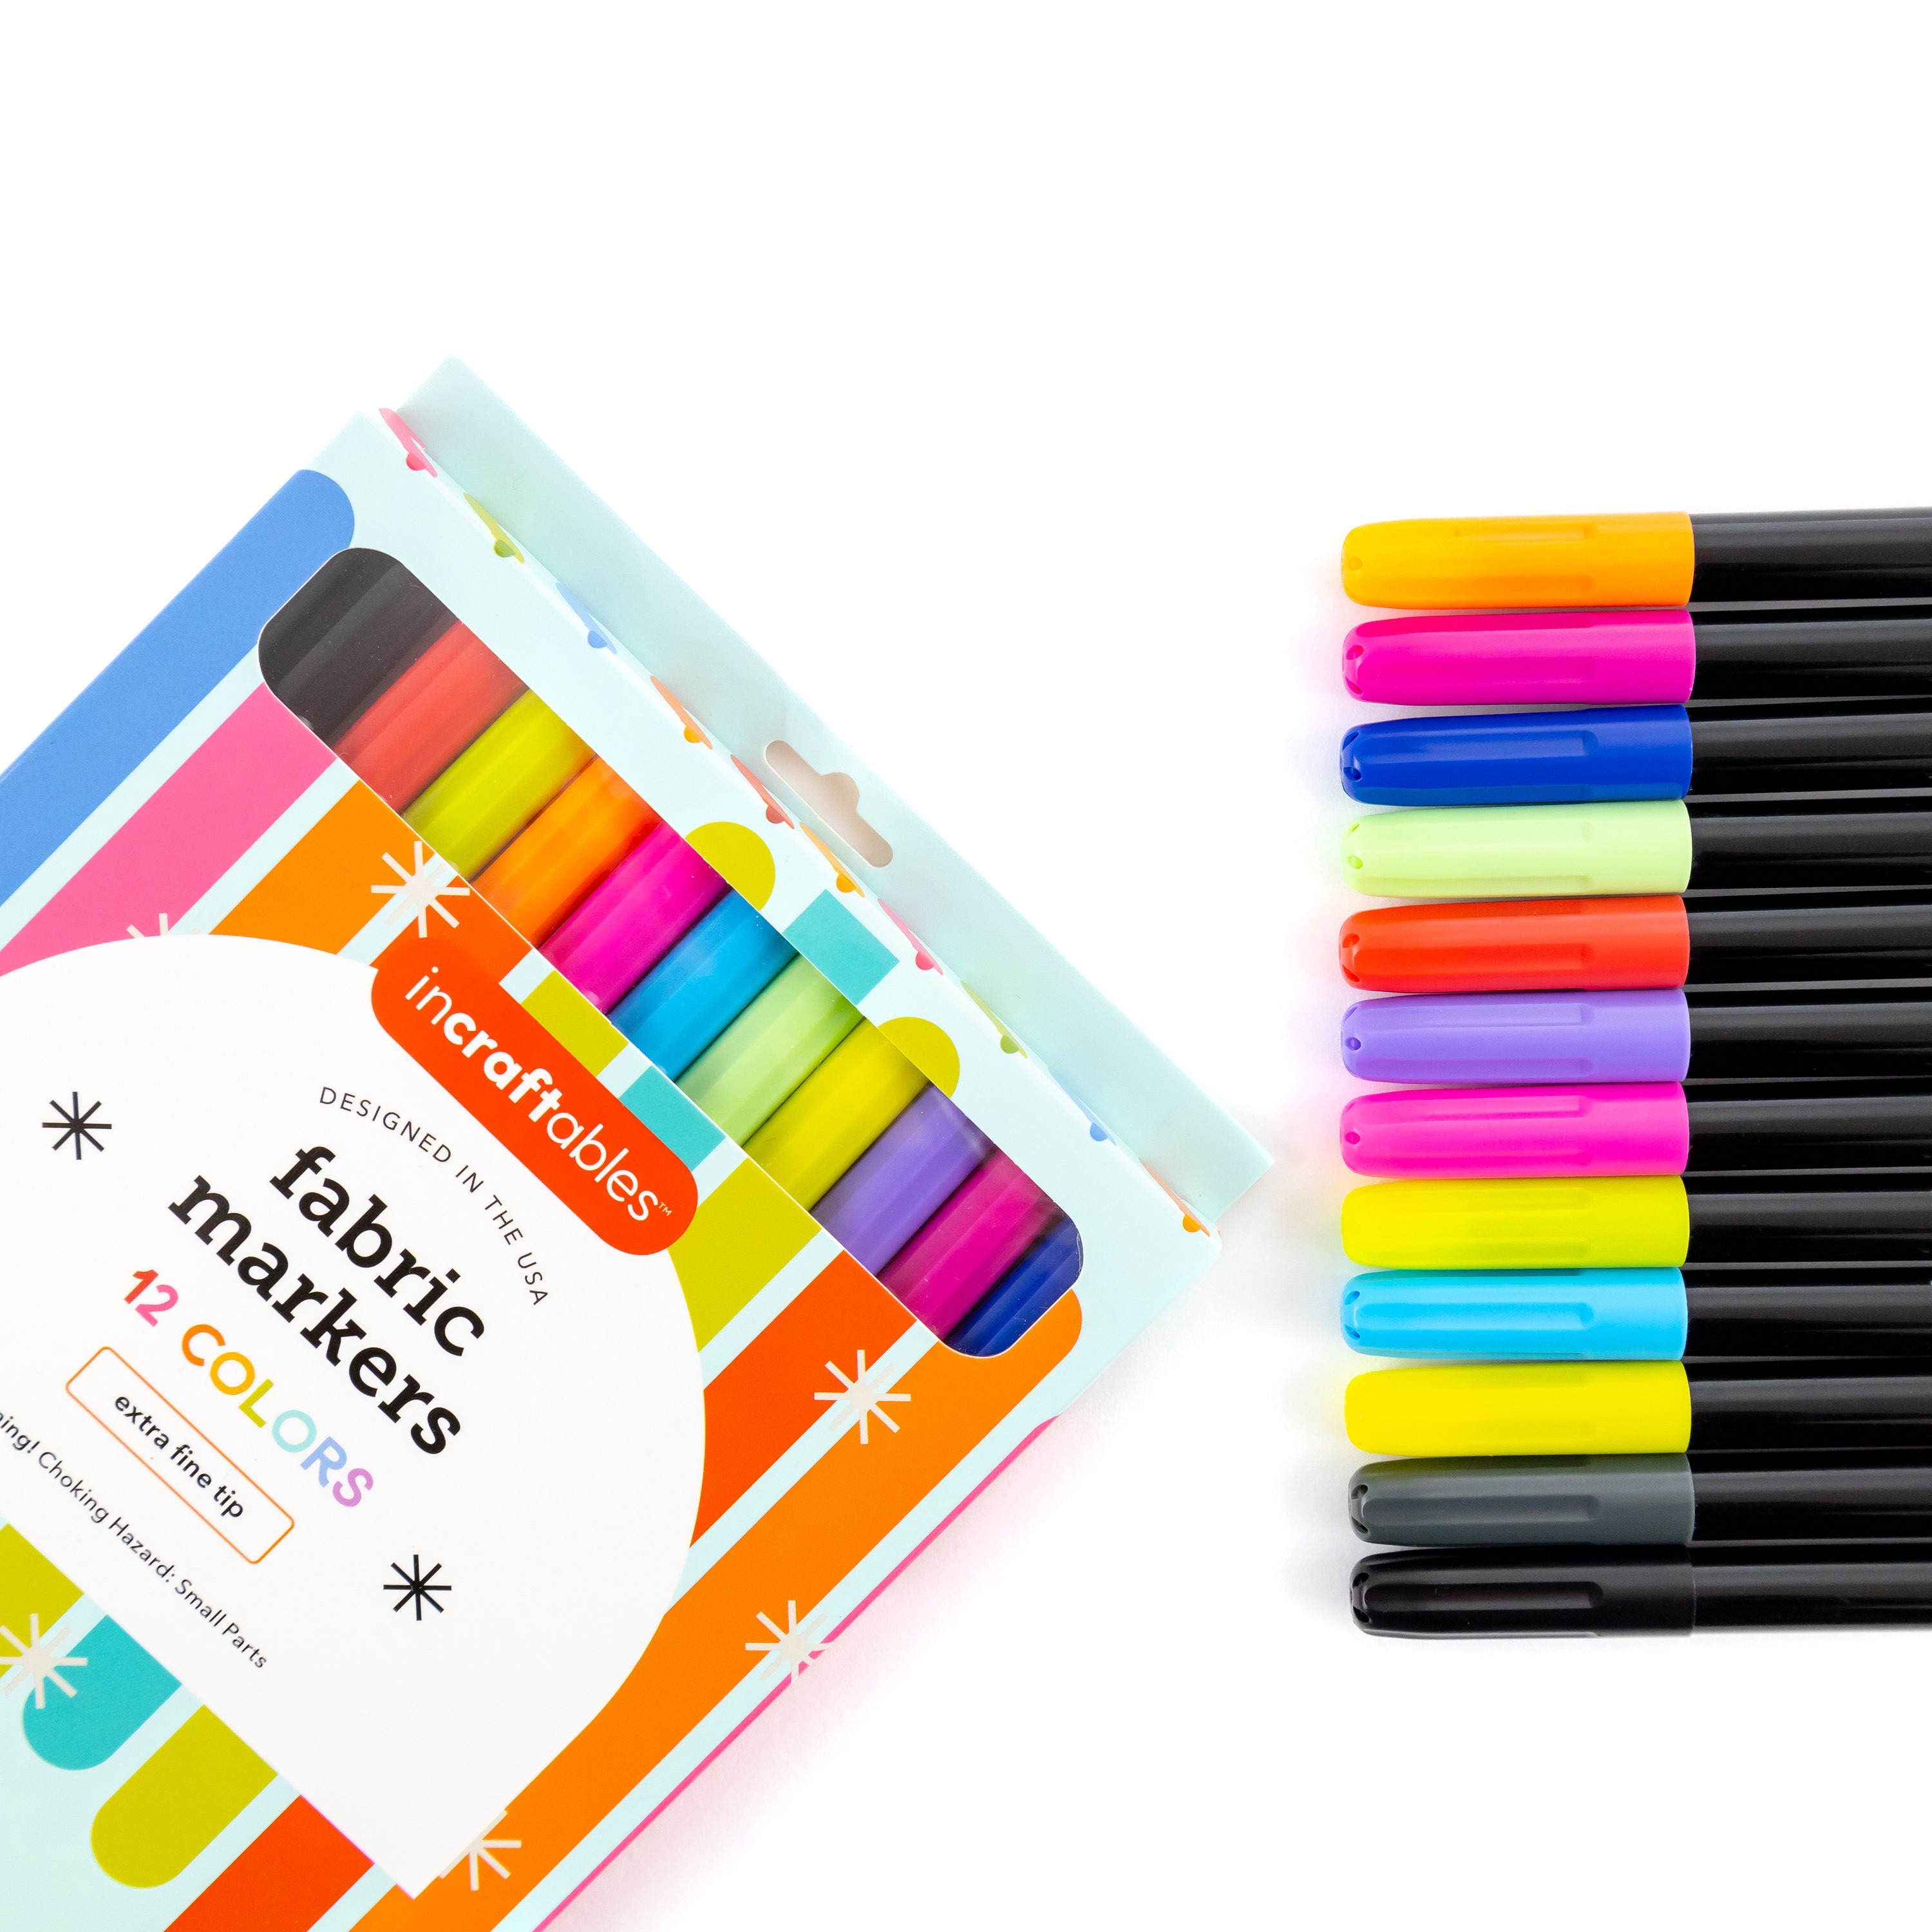 Crafts 4 All crafts 4 all fabric markers for kids & adults - 36 dual tip,  water-based, permanent fabric marker pens w/minimal bleed for de